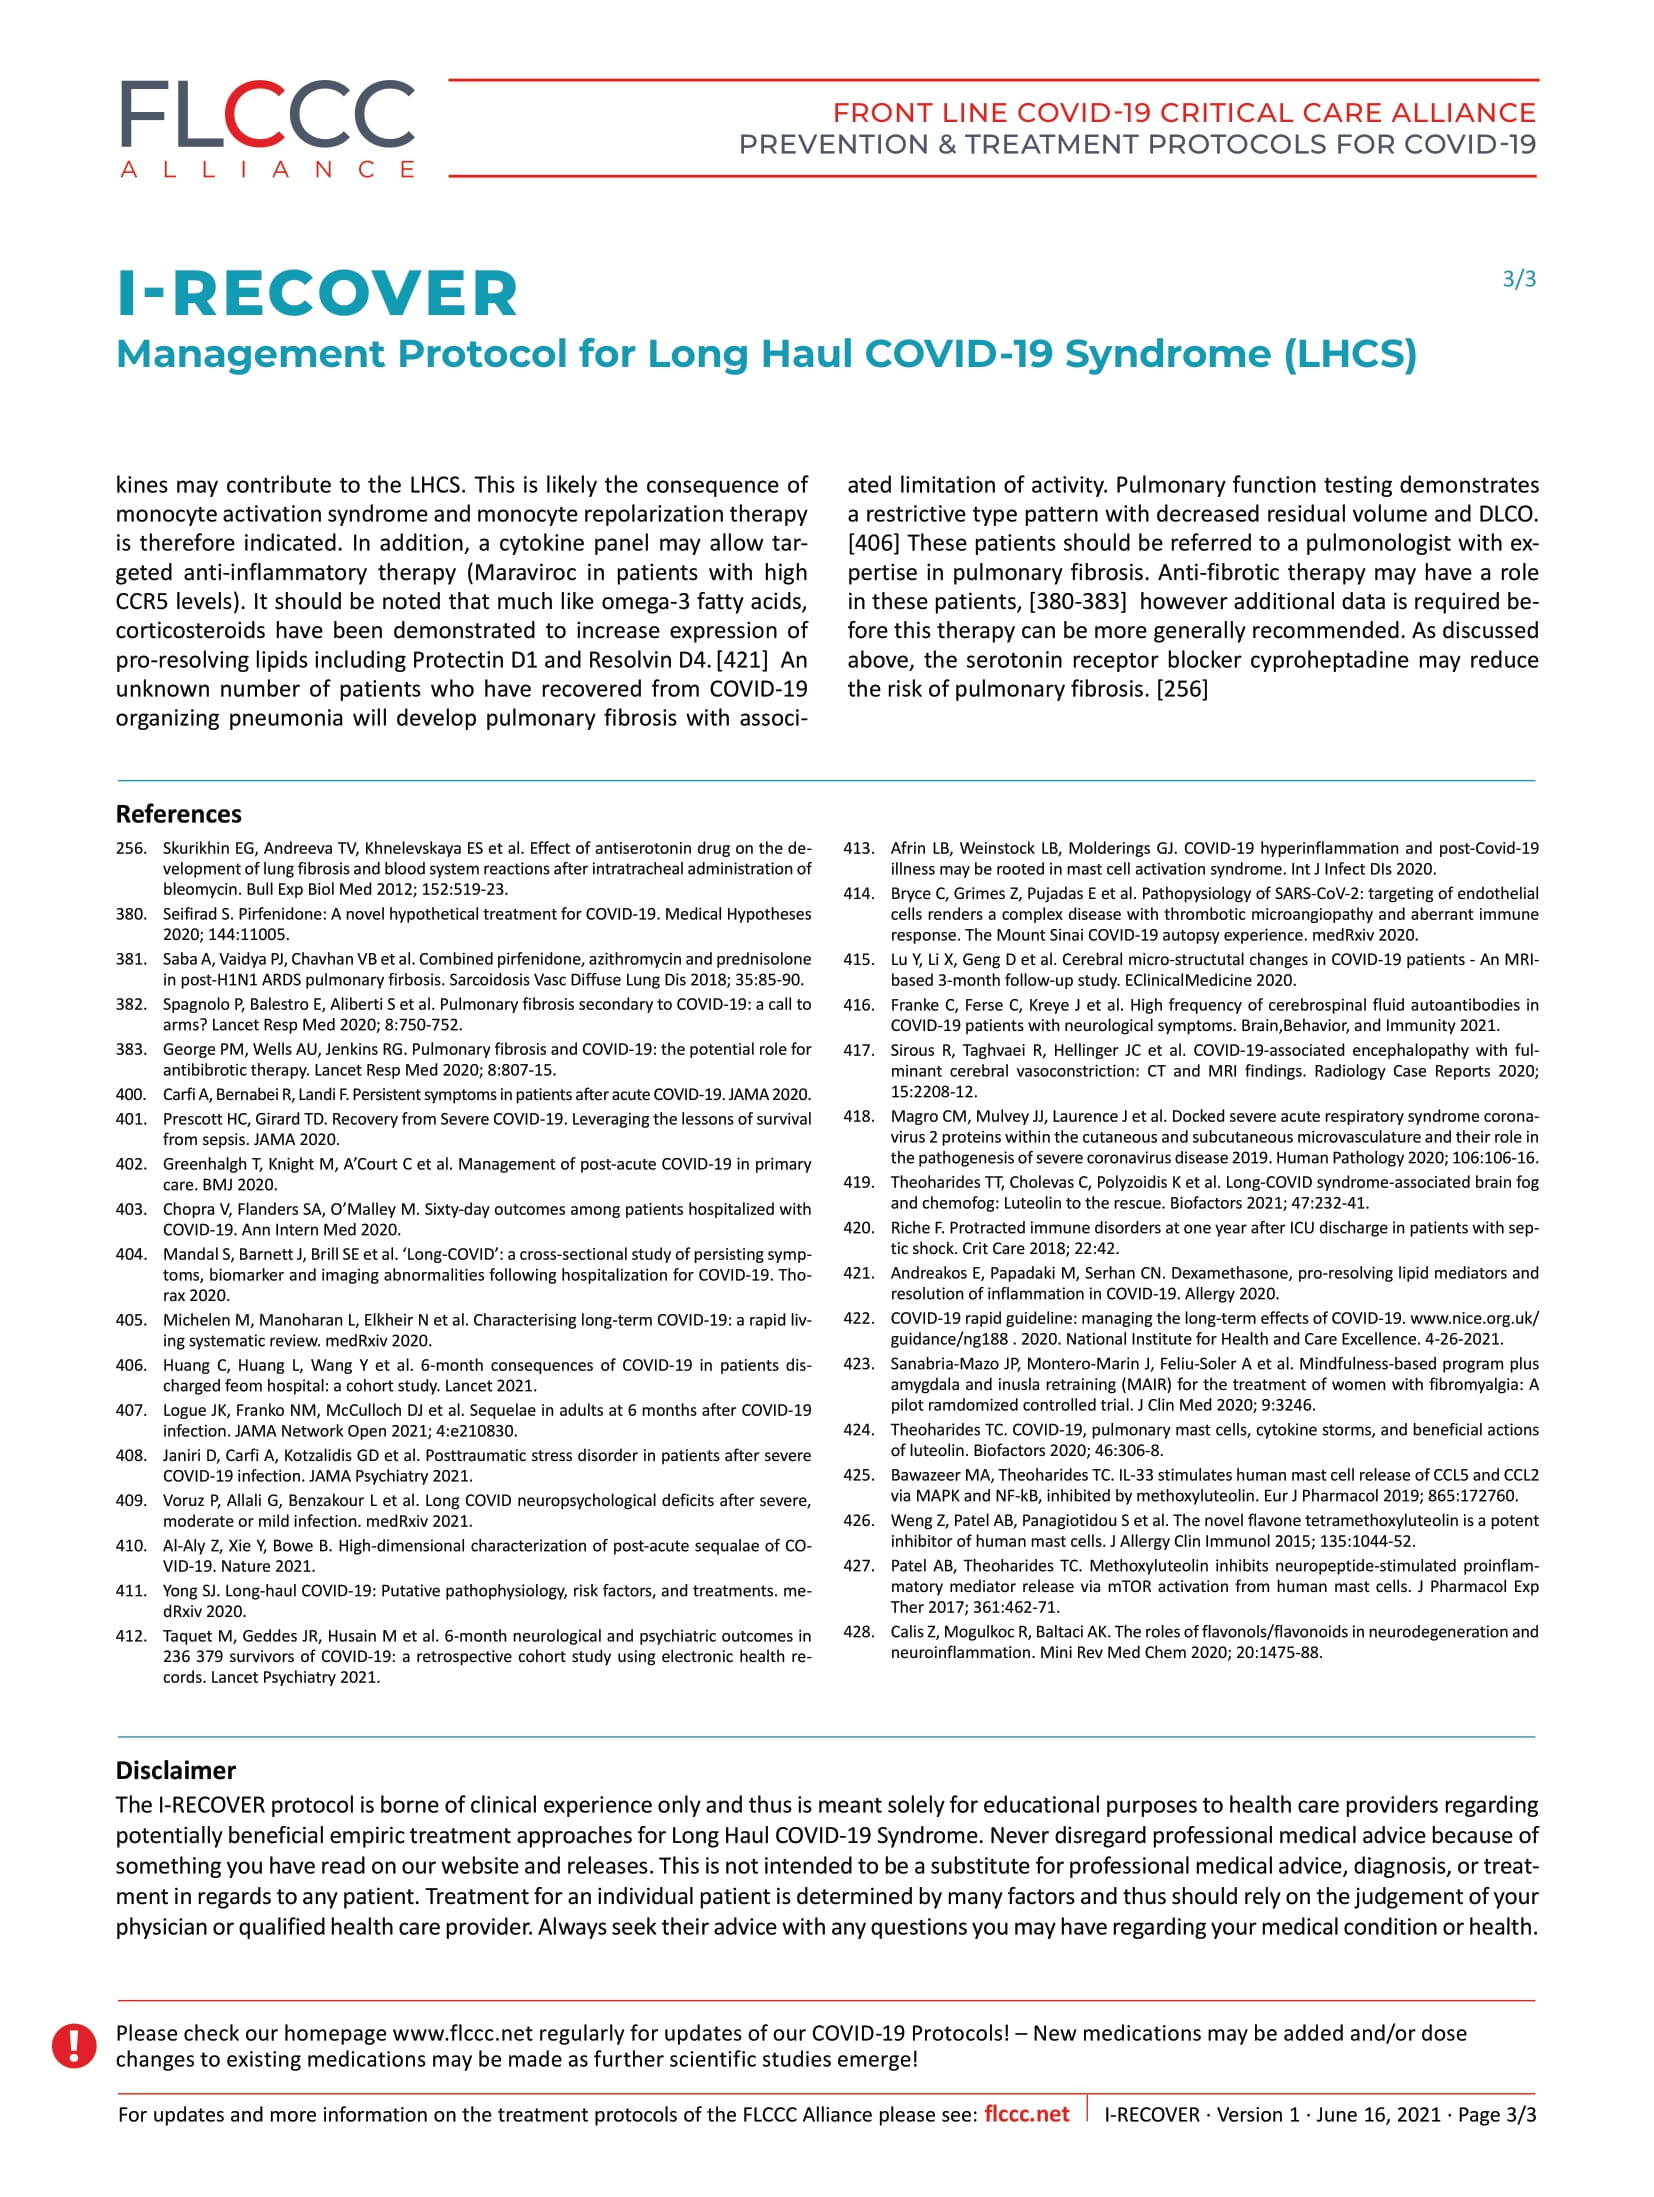 FLCCC Alliance I RECOVER Management Protocol for Long Haul COVID 19 Syndrome 3